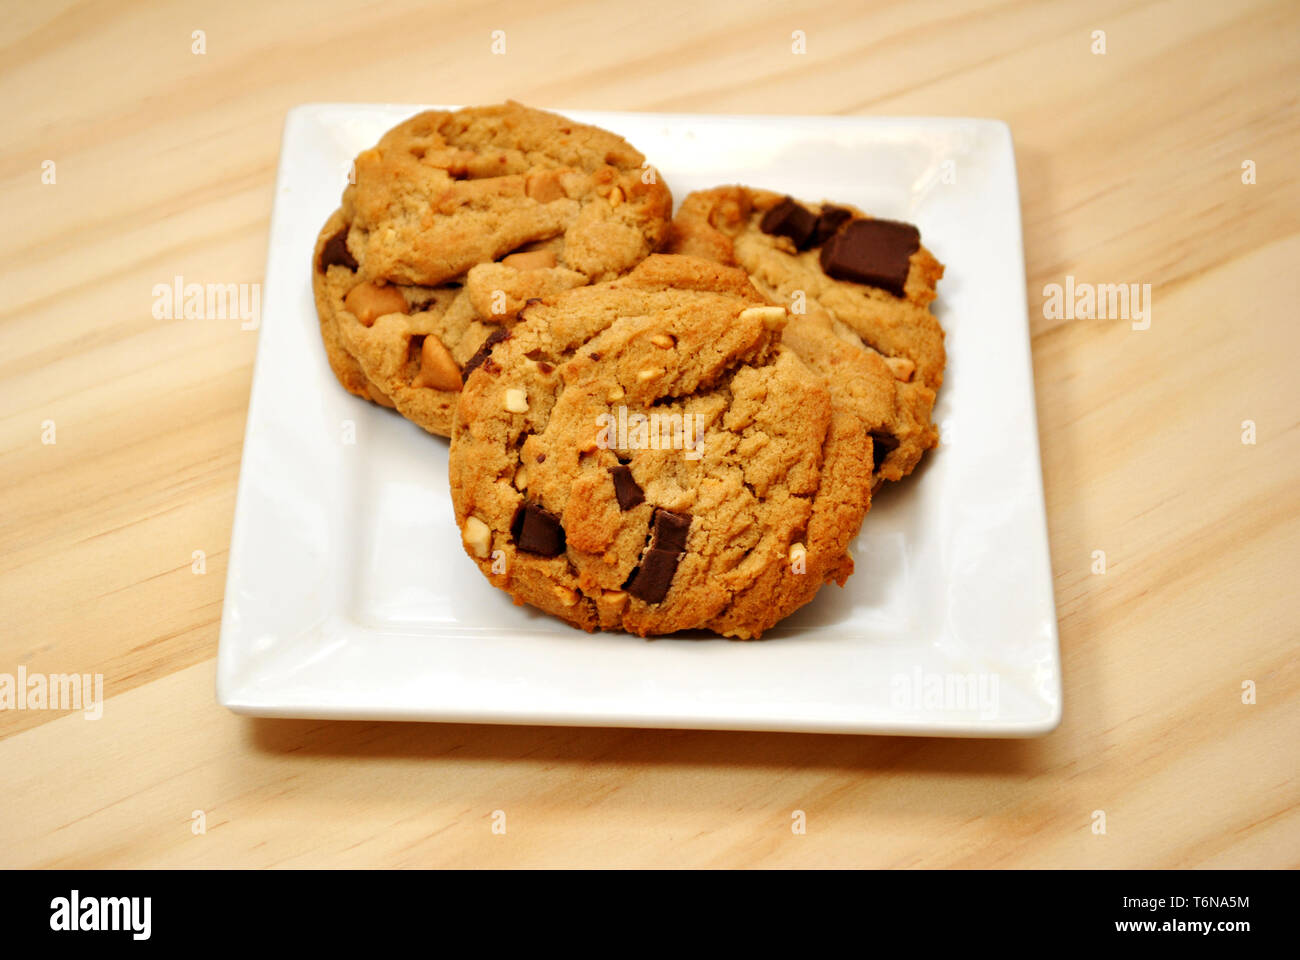 Chocolate Chunk Cookies on a Plate Stock Photo